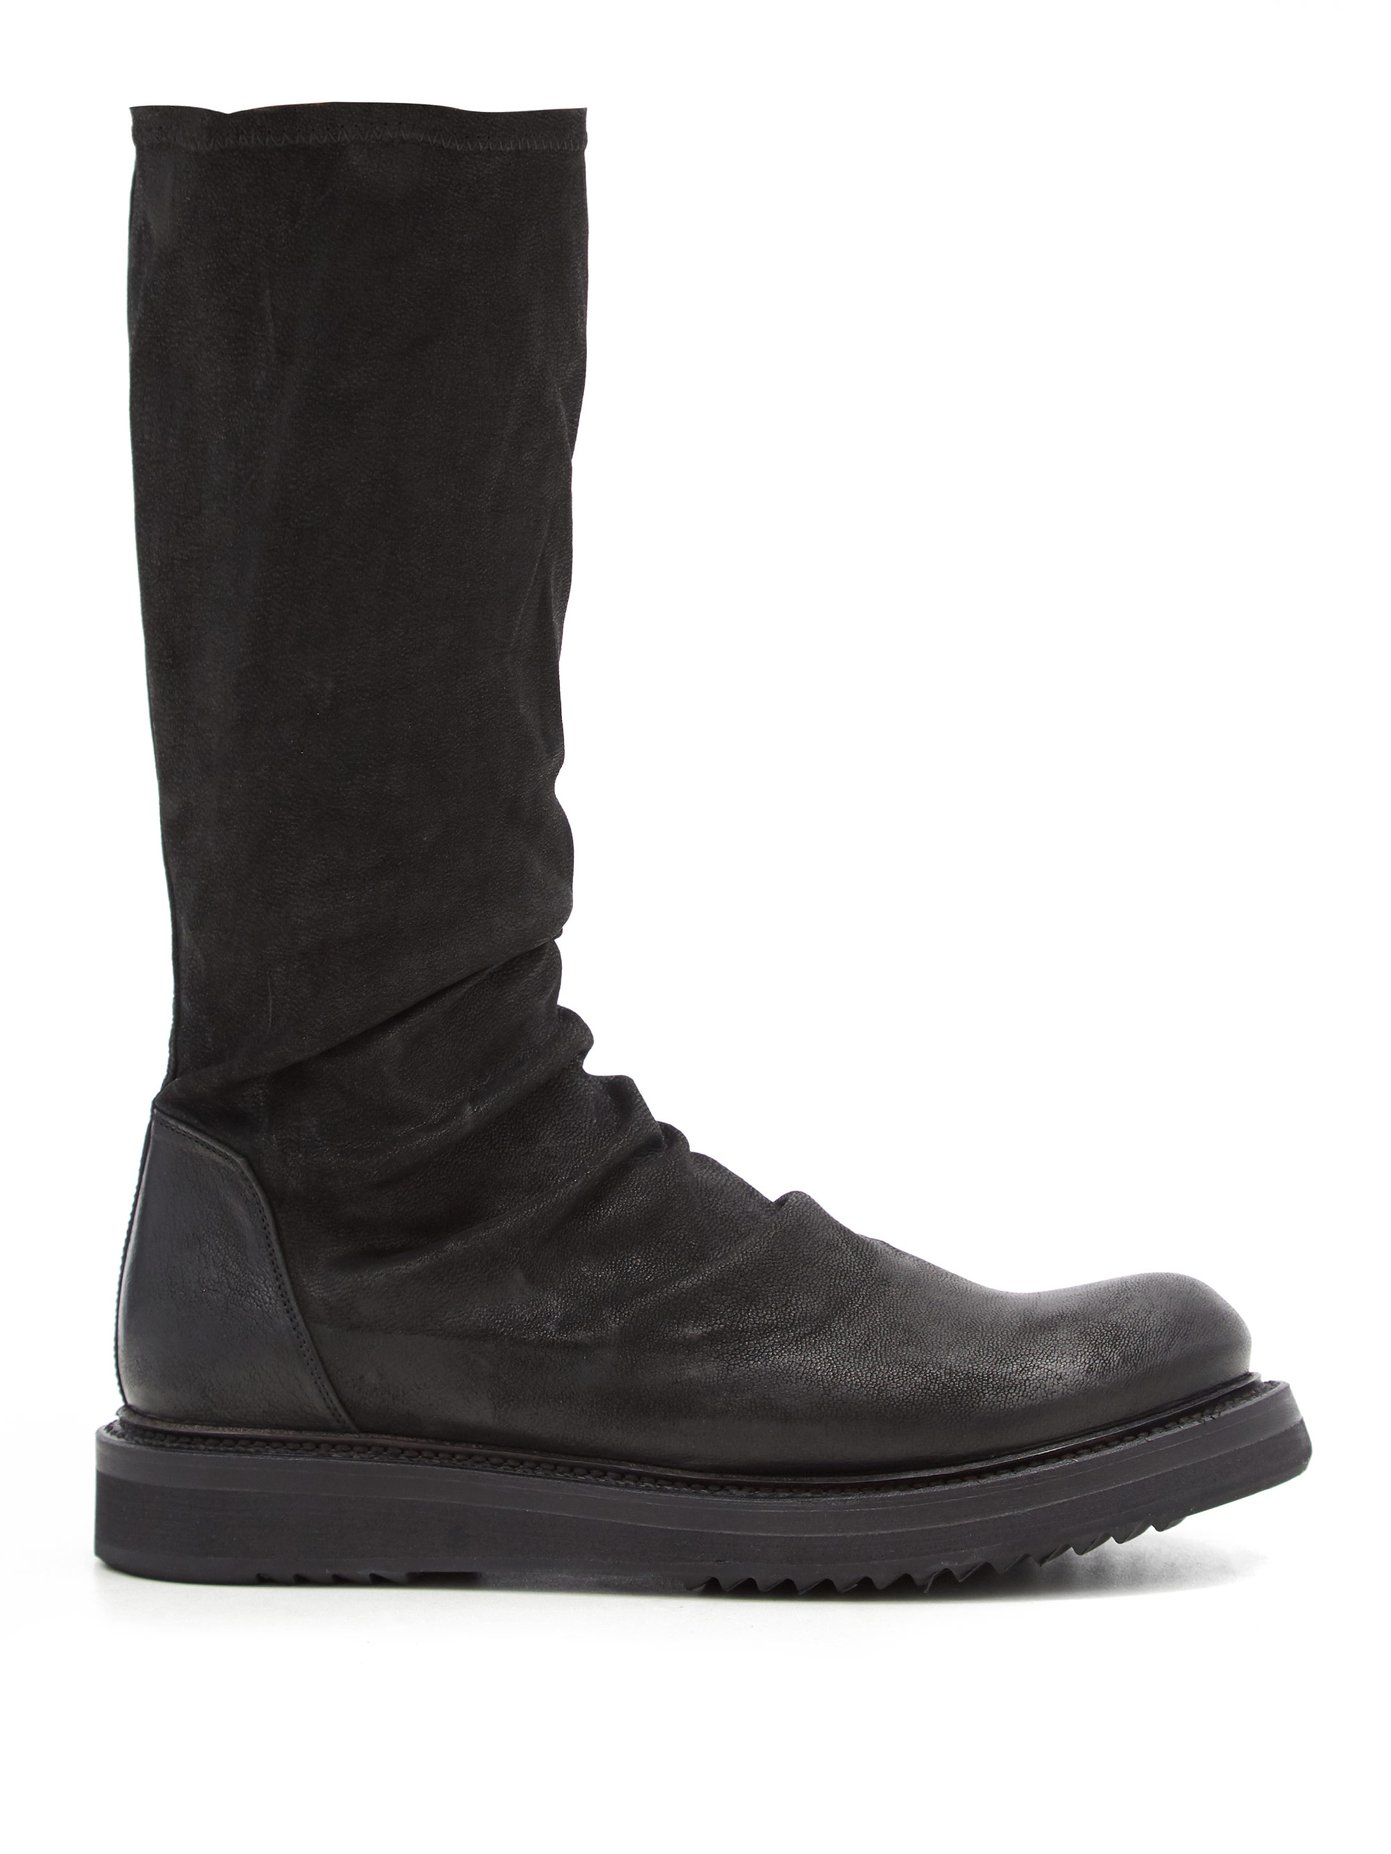 leather mid-calf boots | Rick Owens 